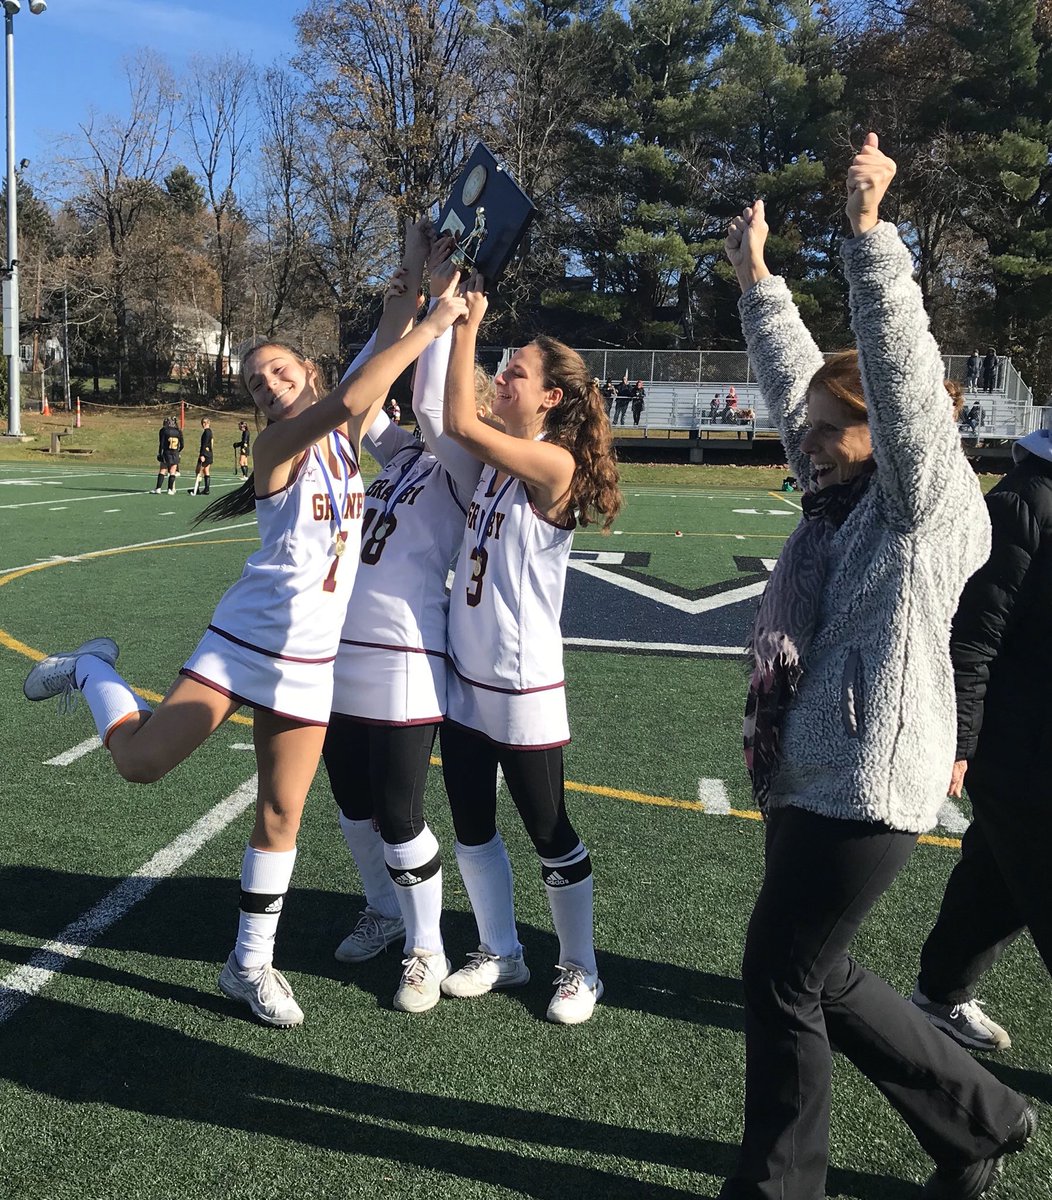 For the first time since 2011,  @GranbySports finished the year on top of the field hockey world, beating North Branford 1-0 to win the Class M title. “‘We need to win this year, we need to do whatever it takes.’”  https://www.courant.com/sports/high-schools/hc-sp-hs-class-s-field-hockey-1124-20191123-v4ee456zrzfoppk7kikurz7nma-story.html#nt=oft-Double%20Chain~Feed-Driven%20Flex%20Feature~breaking-feed~unnamed-feature~~13~yes-art~automated~automatedpage